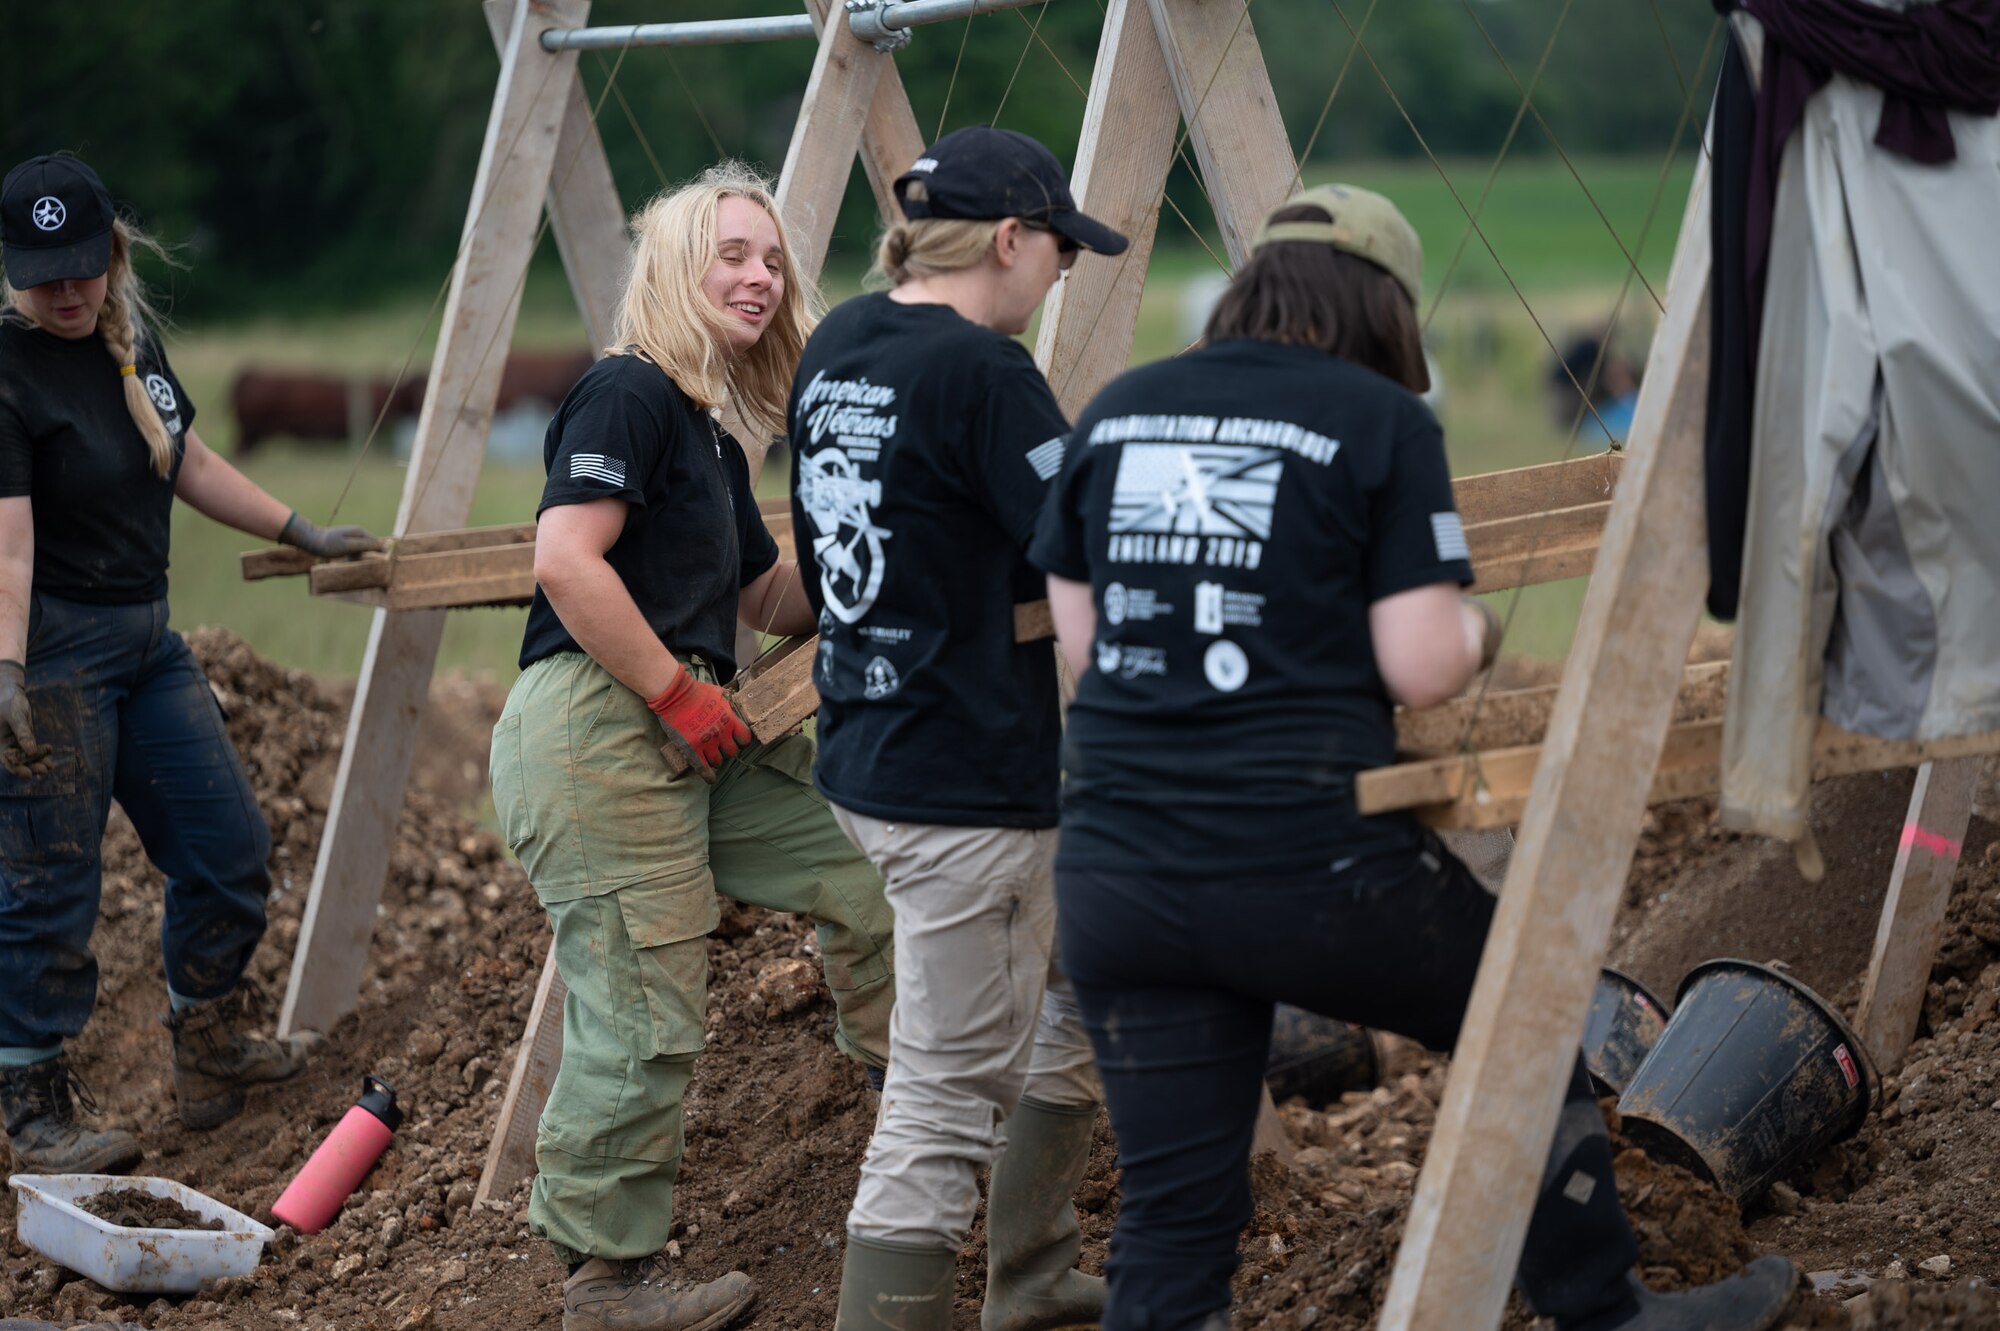 Volunteers with the American Veterans Archeological Recovery group search for remains of fallen service members during a B-24 Liberator excavation at Park Farm in Arundel, England, July 8, 2021. The team was comprised of around 20 volunteers from local universities, veterans from both United States and British armed forces, and active duty service members from RAF Lakenheath. (U.S. Air Force photo by Senior Airman Koby I. Saunders)